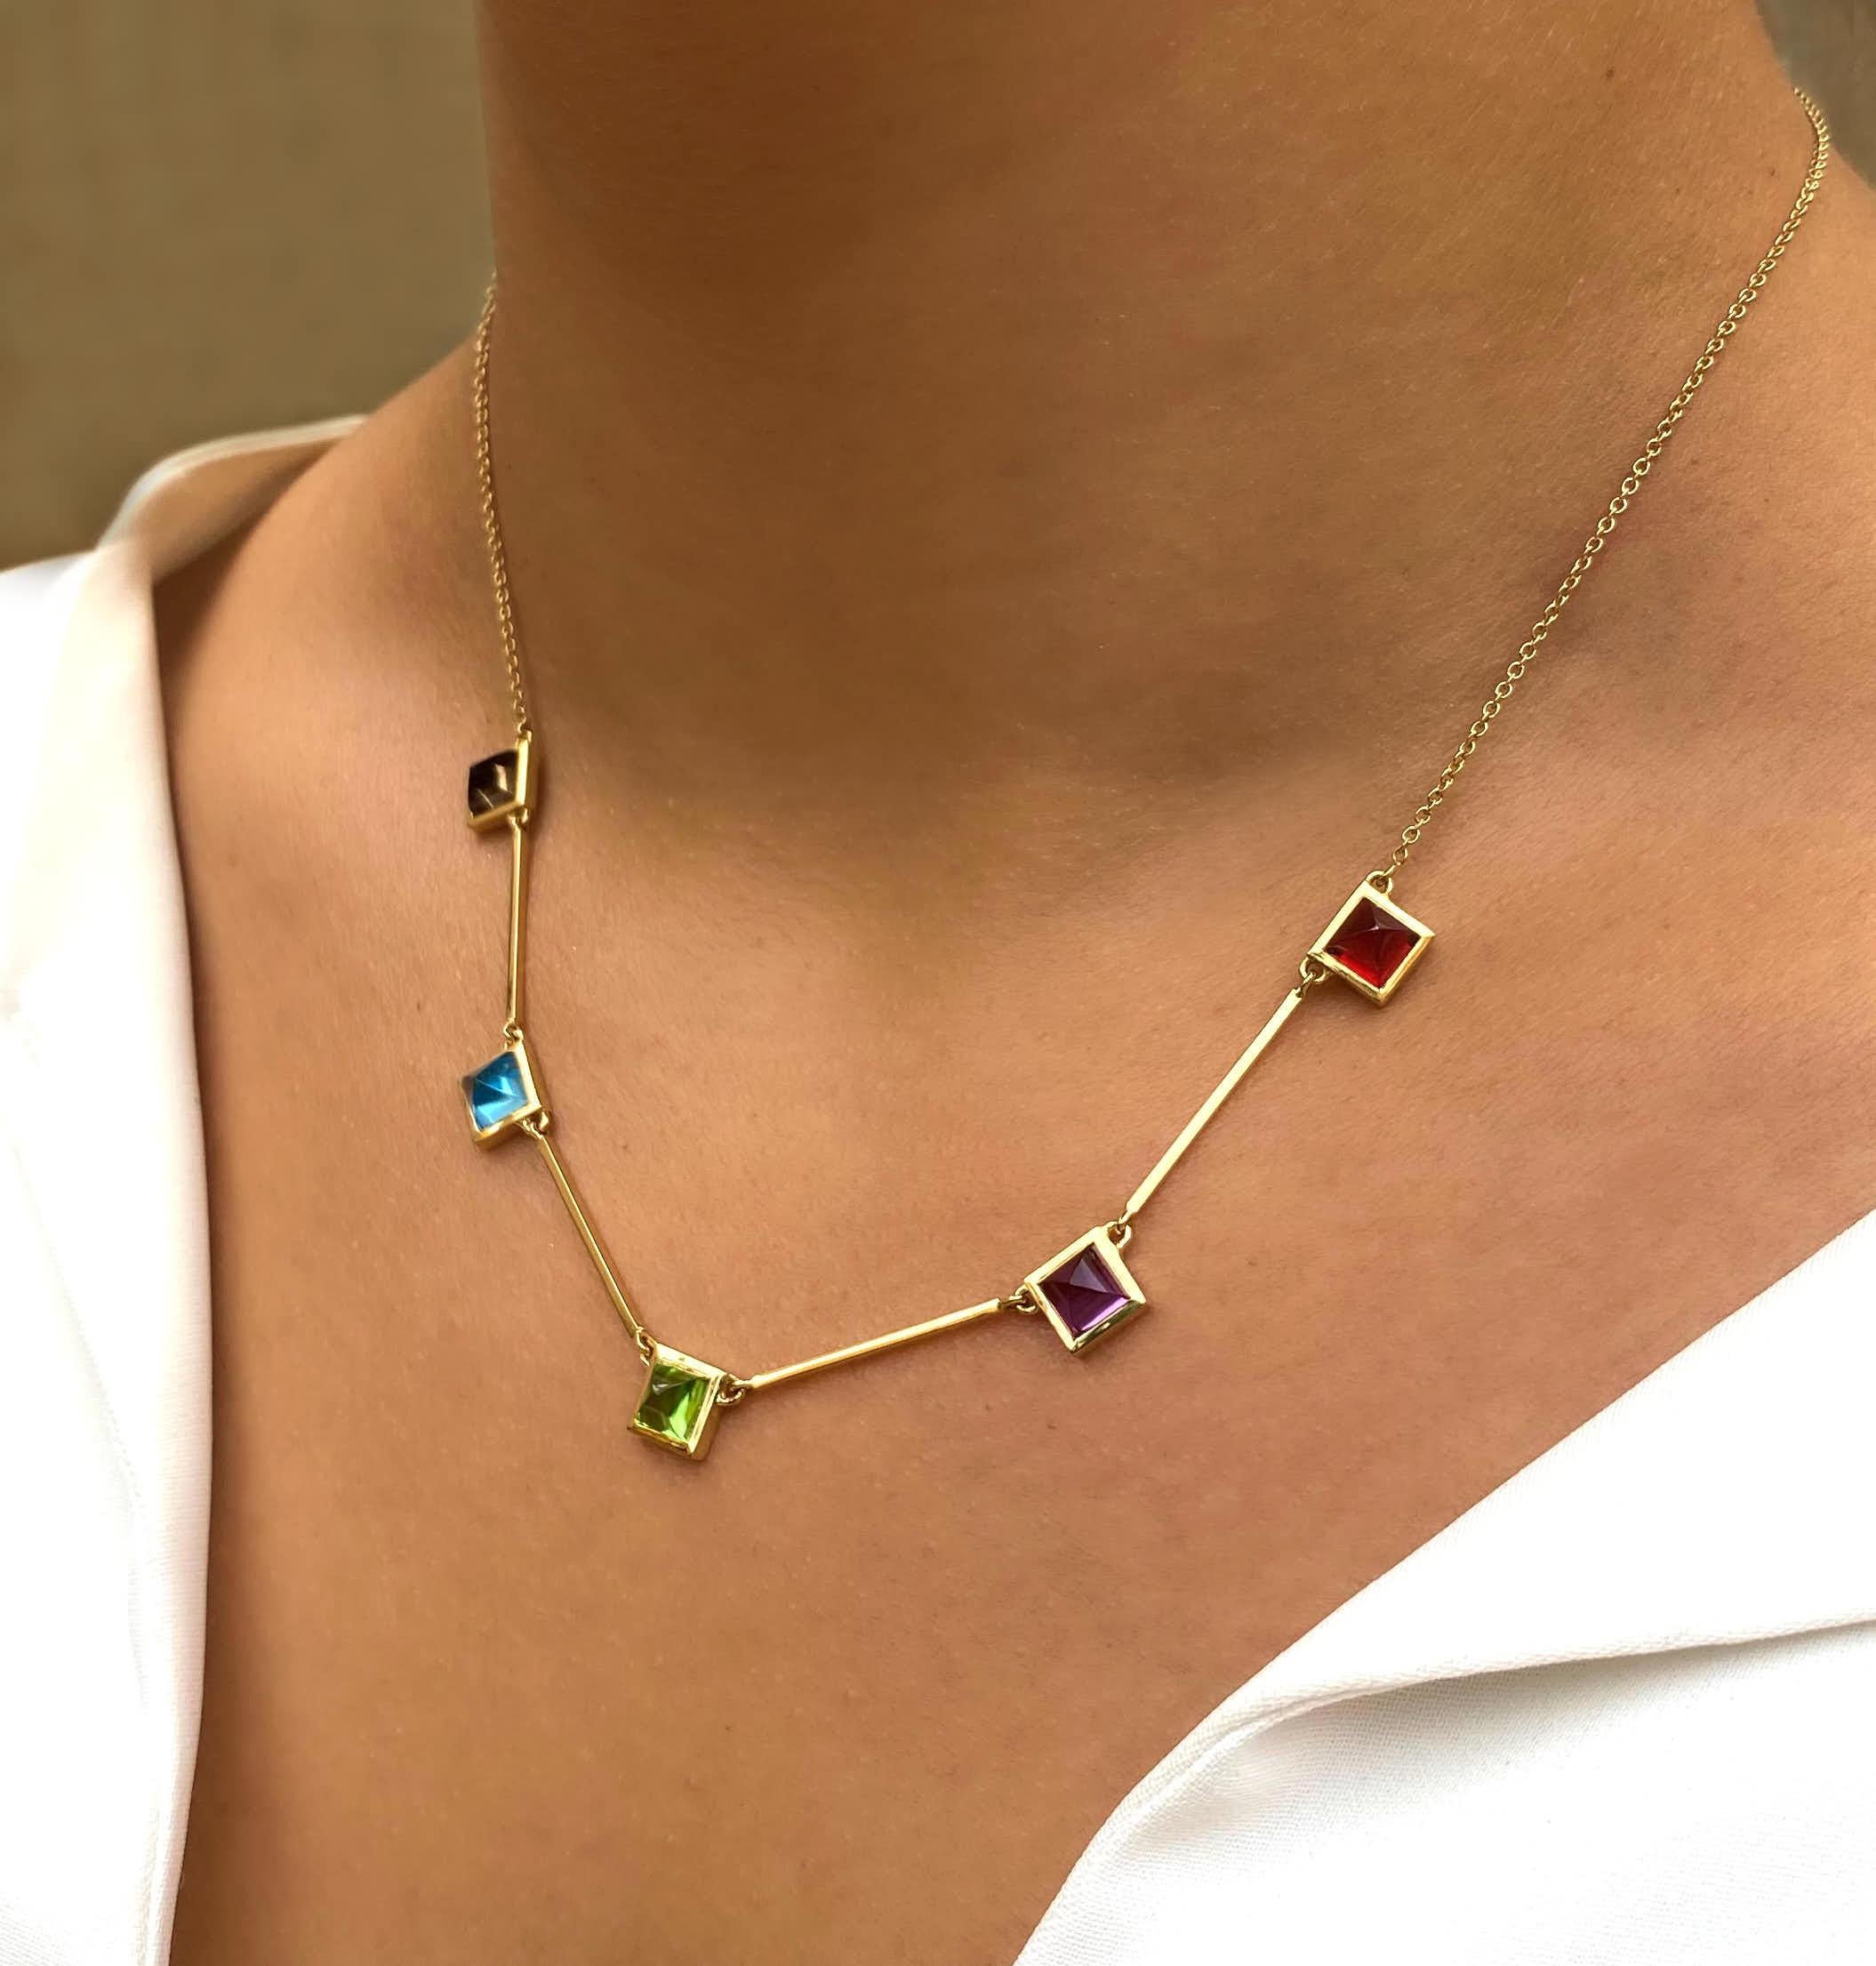 You can combine the gems or choose our combination of Garnet,  Amethyst , Peridot, Blue Topaz  and Smoky Quartz.

Benben collection is inspired by the myths and the geometry of this pyramid. The Benben stone, named after the mound, was a sacred